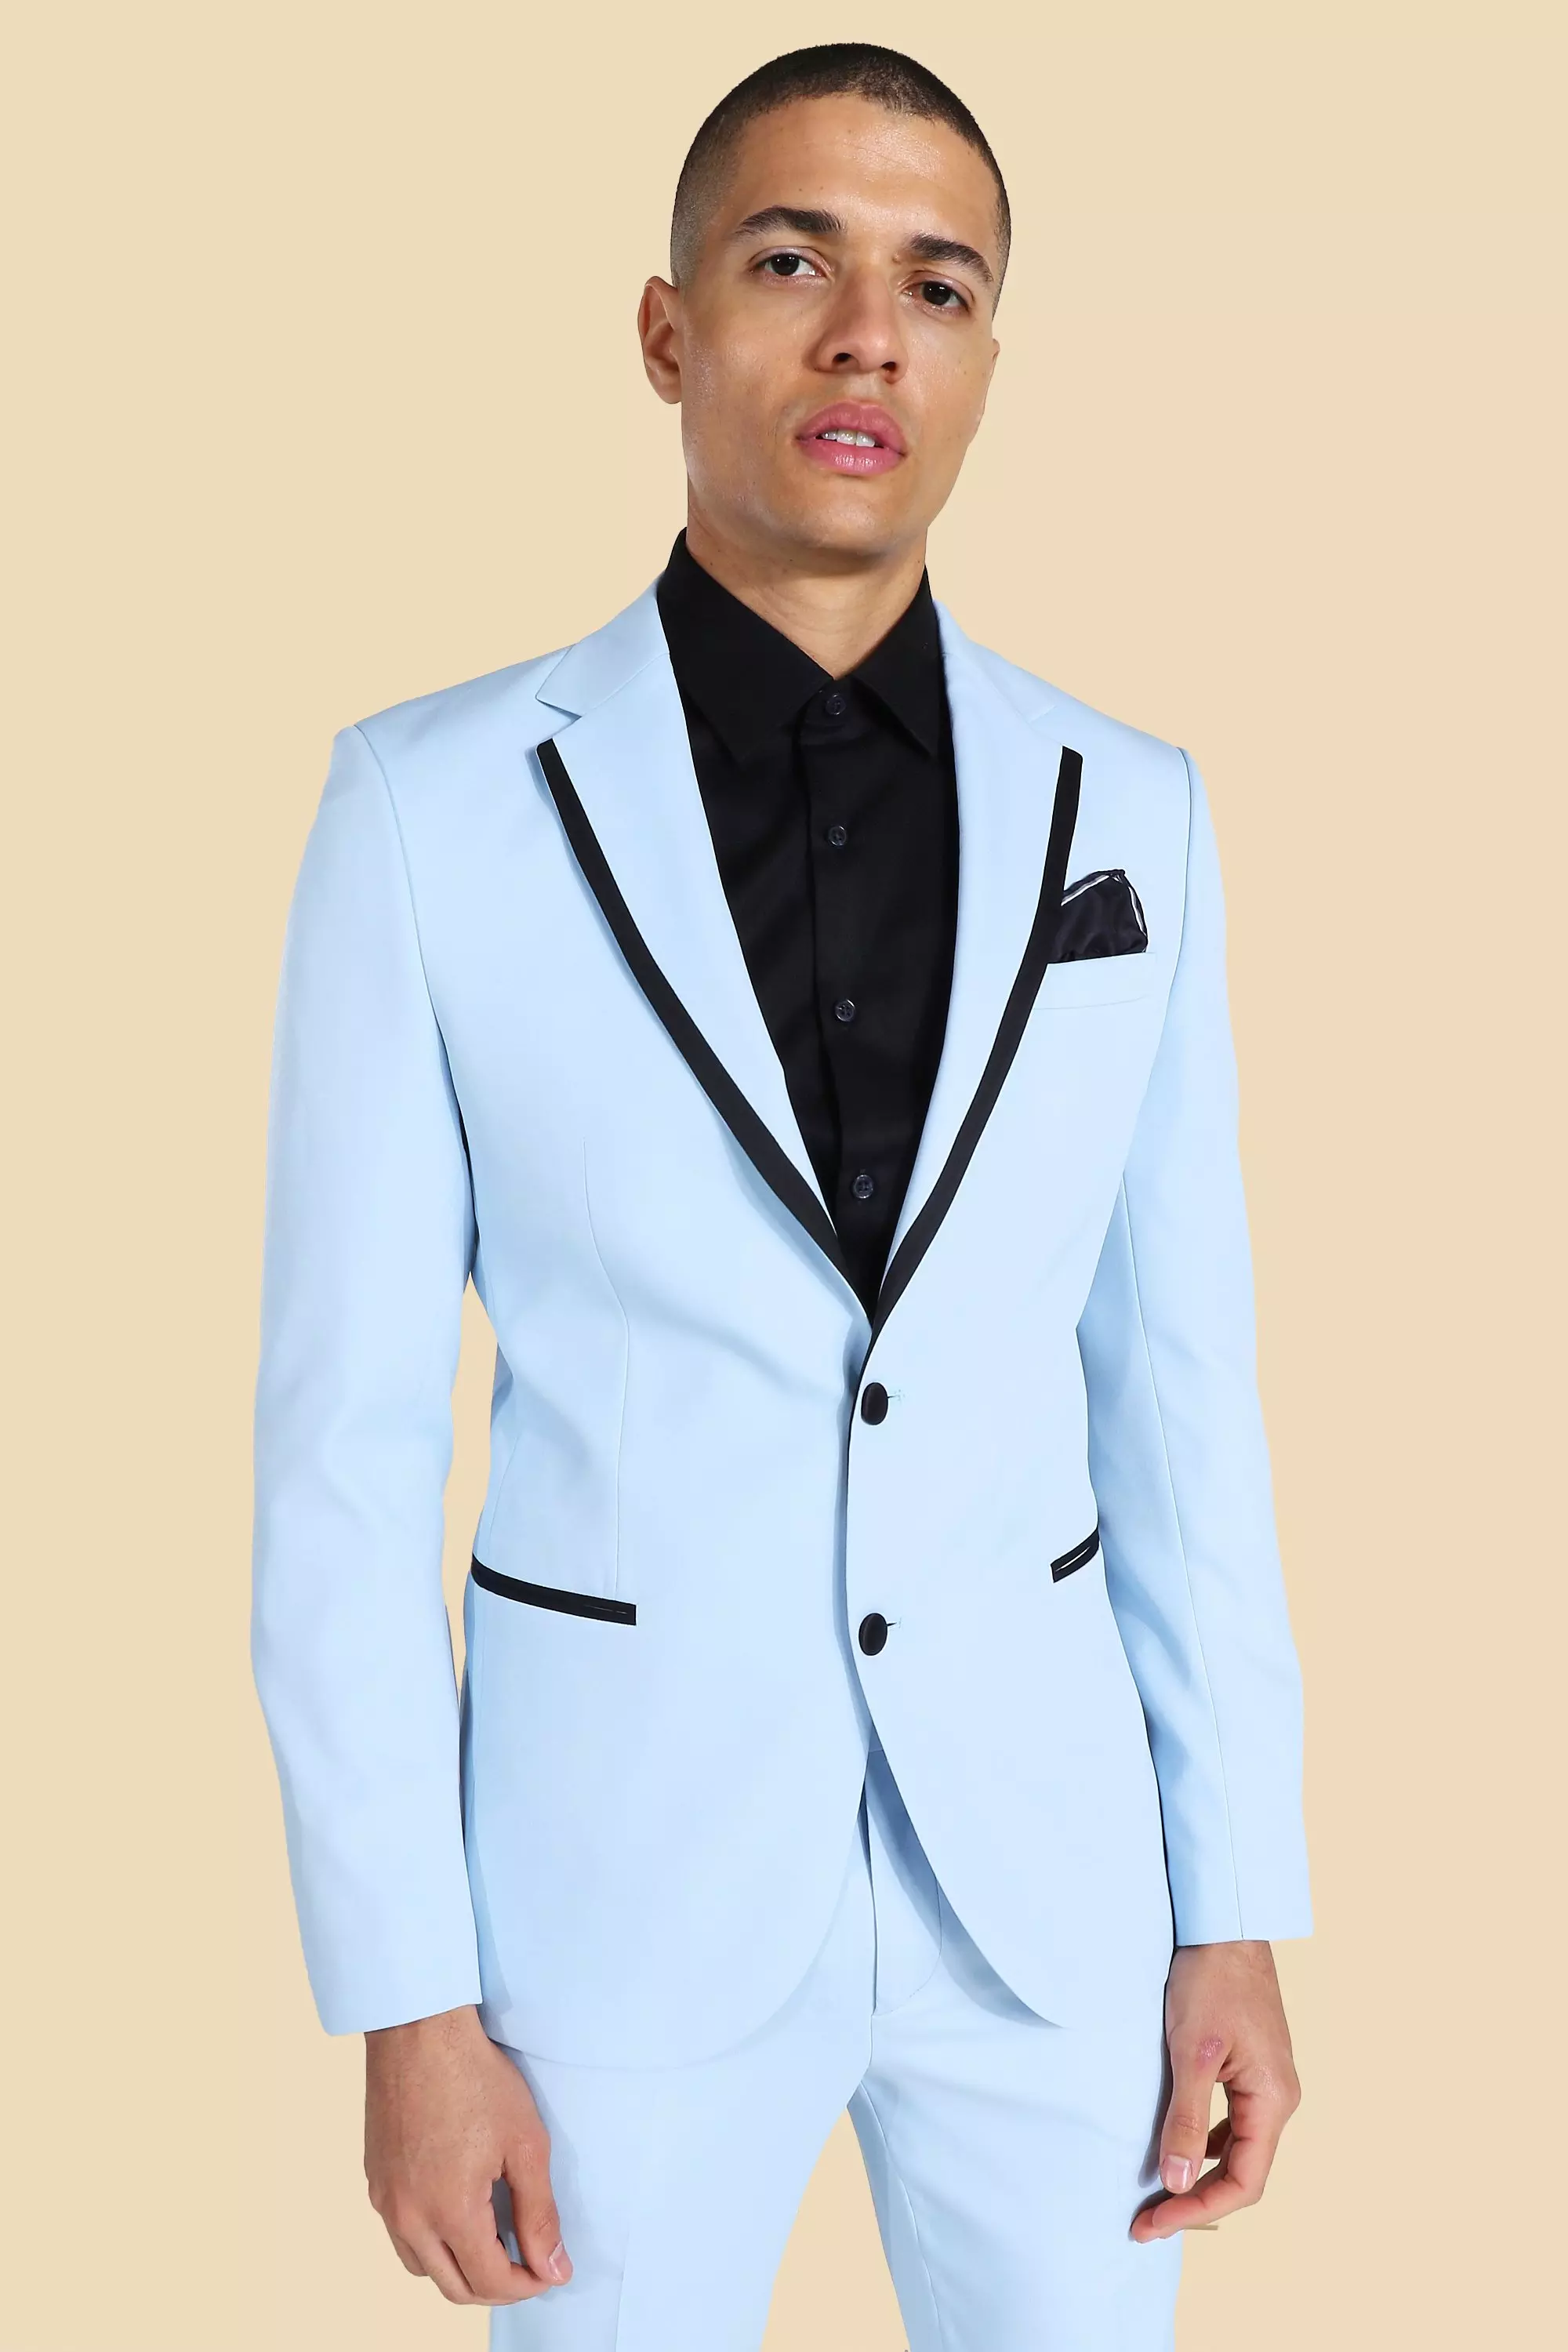 Advarsel Tulipaner minus Skinny Light Blue Suit With Contrast Piping | boohooMAN USA